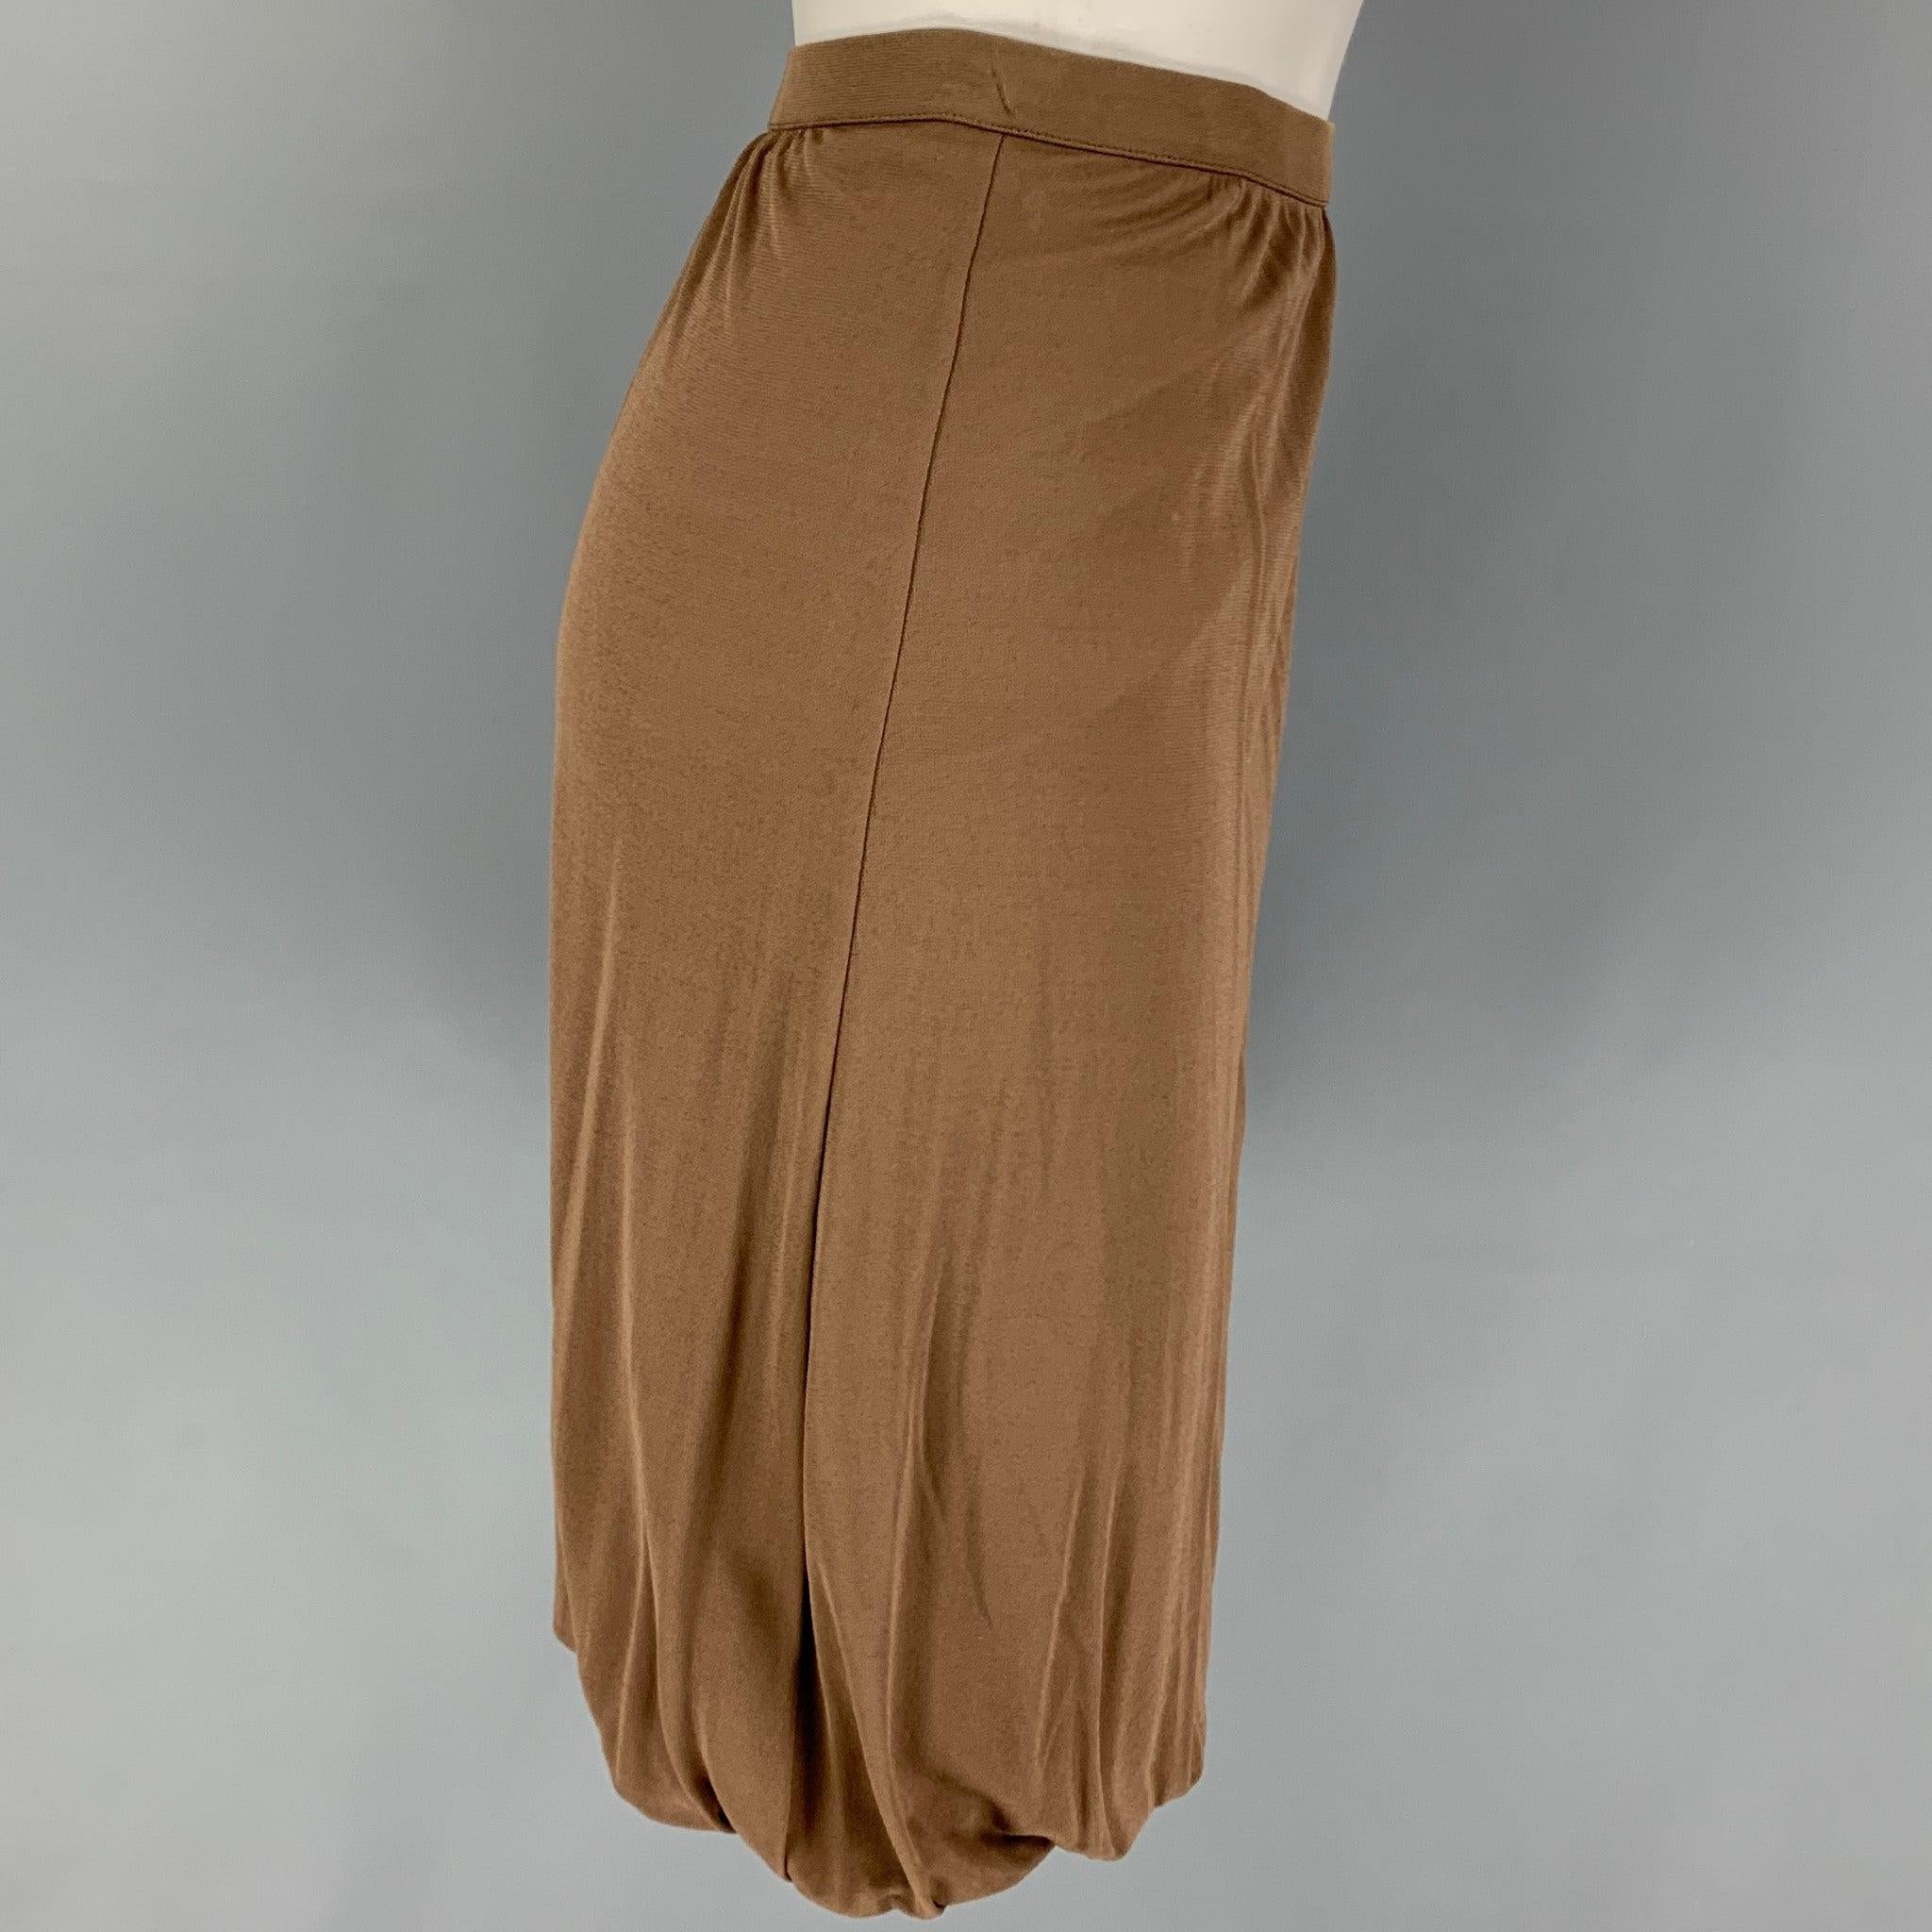 MISSONI skirt comes in a taupe rayon featuring a bubble hem and a elastic waist. Made in Italy.
Very Good
Pre-Owned Condition. 

Marked:   36 

Measurements: 
  Waist:
27 inches  Hip:
32 inches  Length: 22 inches 
  
  
 
Reference: 119456
Category: